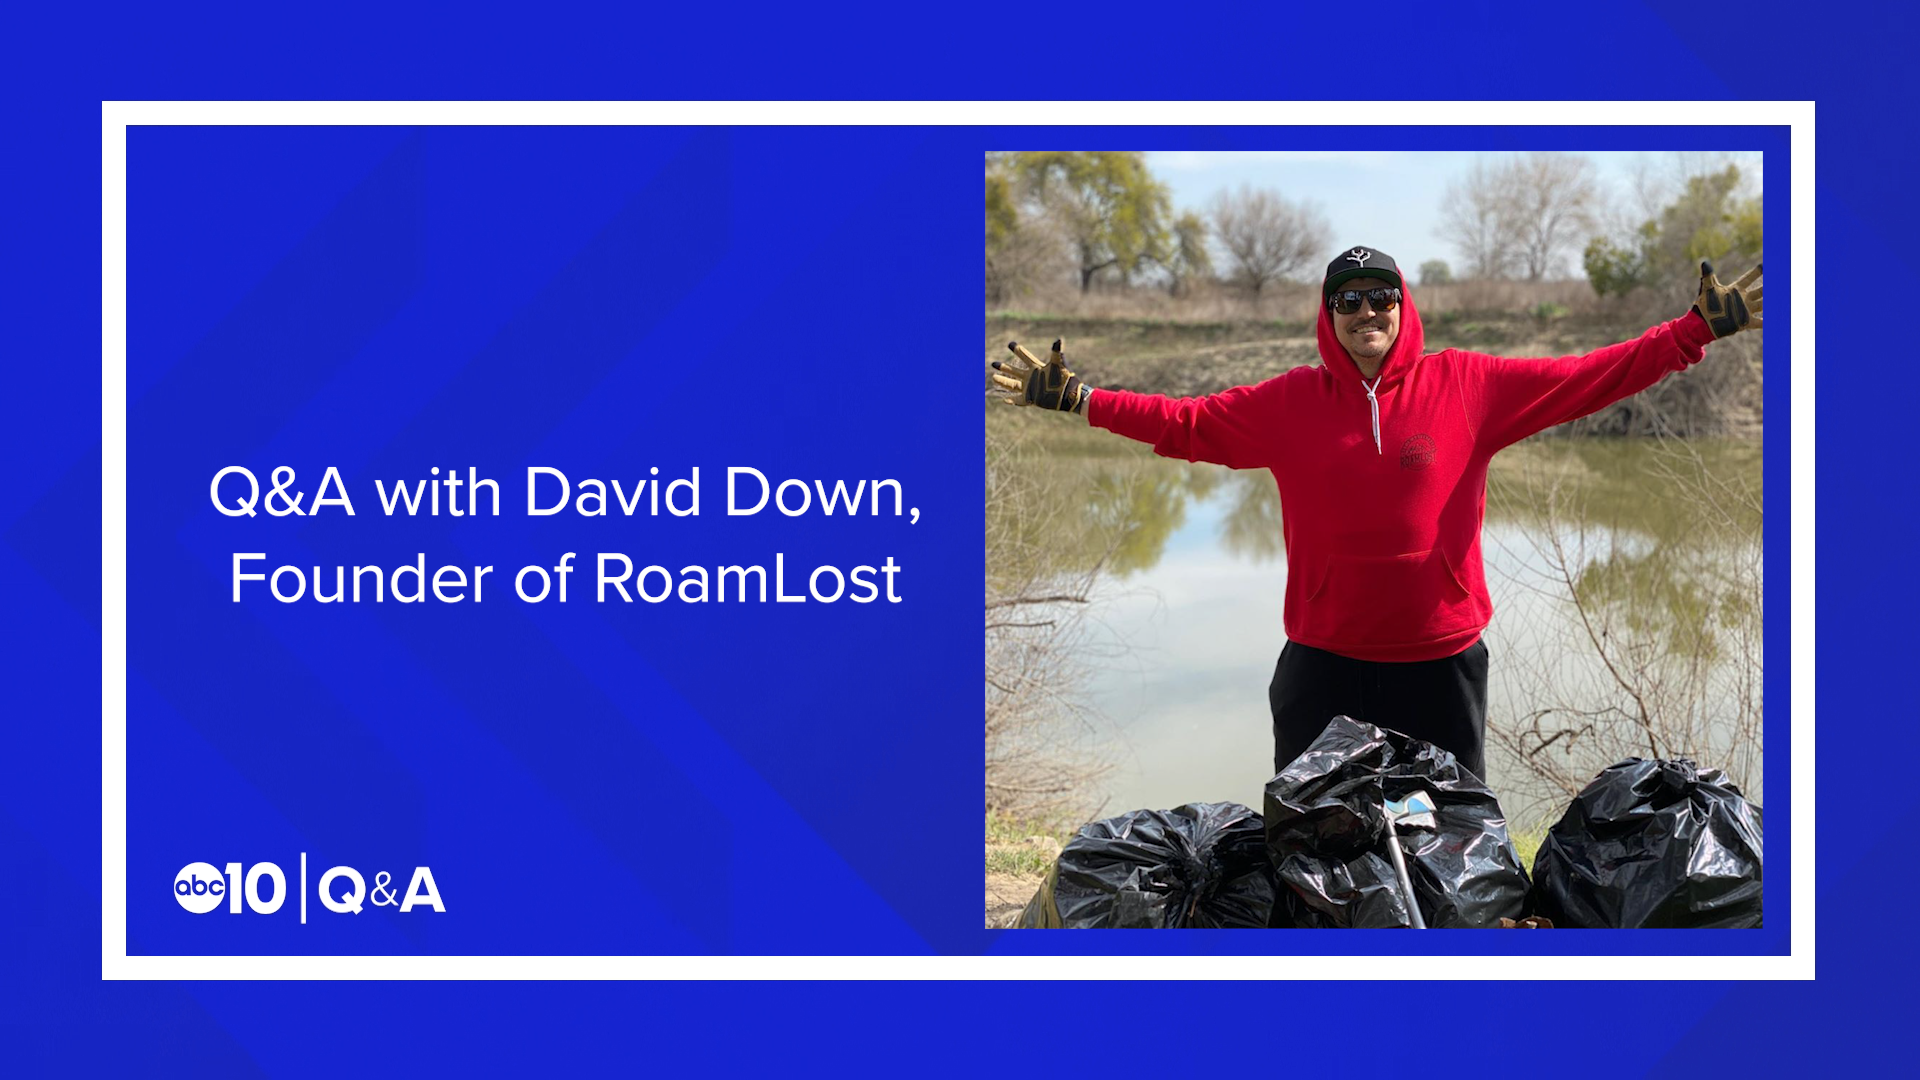 David Down found himself complaining about Modesto's trash problem, so he took take action and has since bagged more than a literal ton of trash around the area.